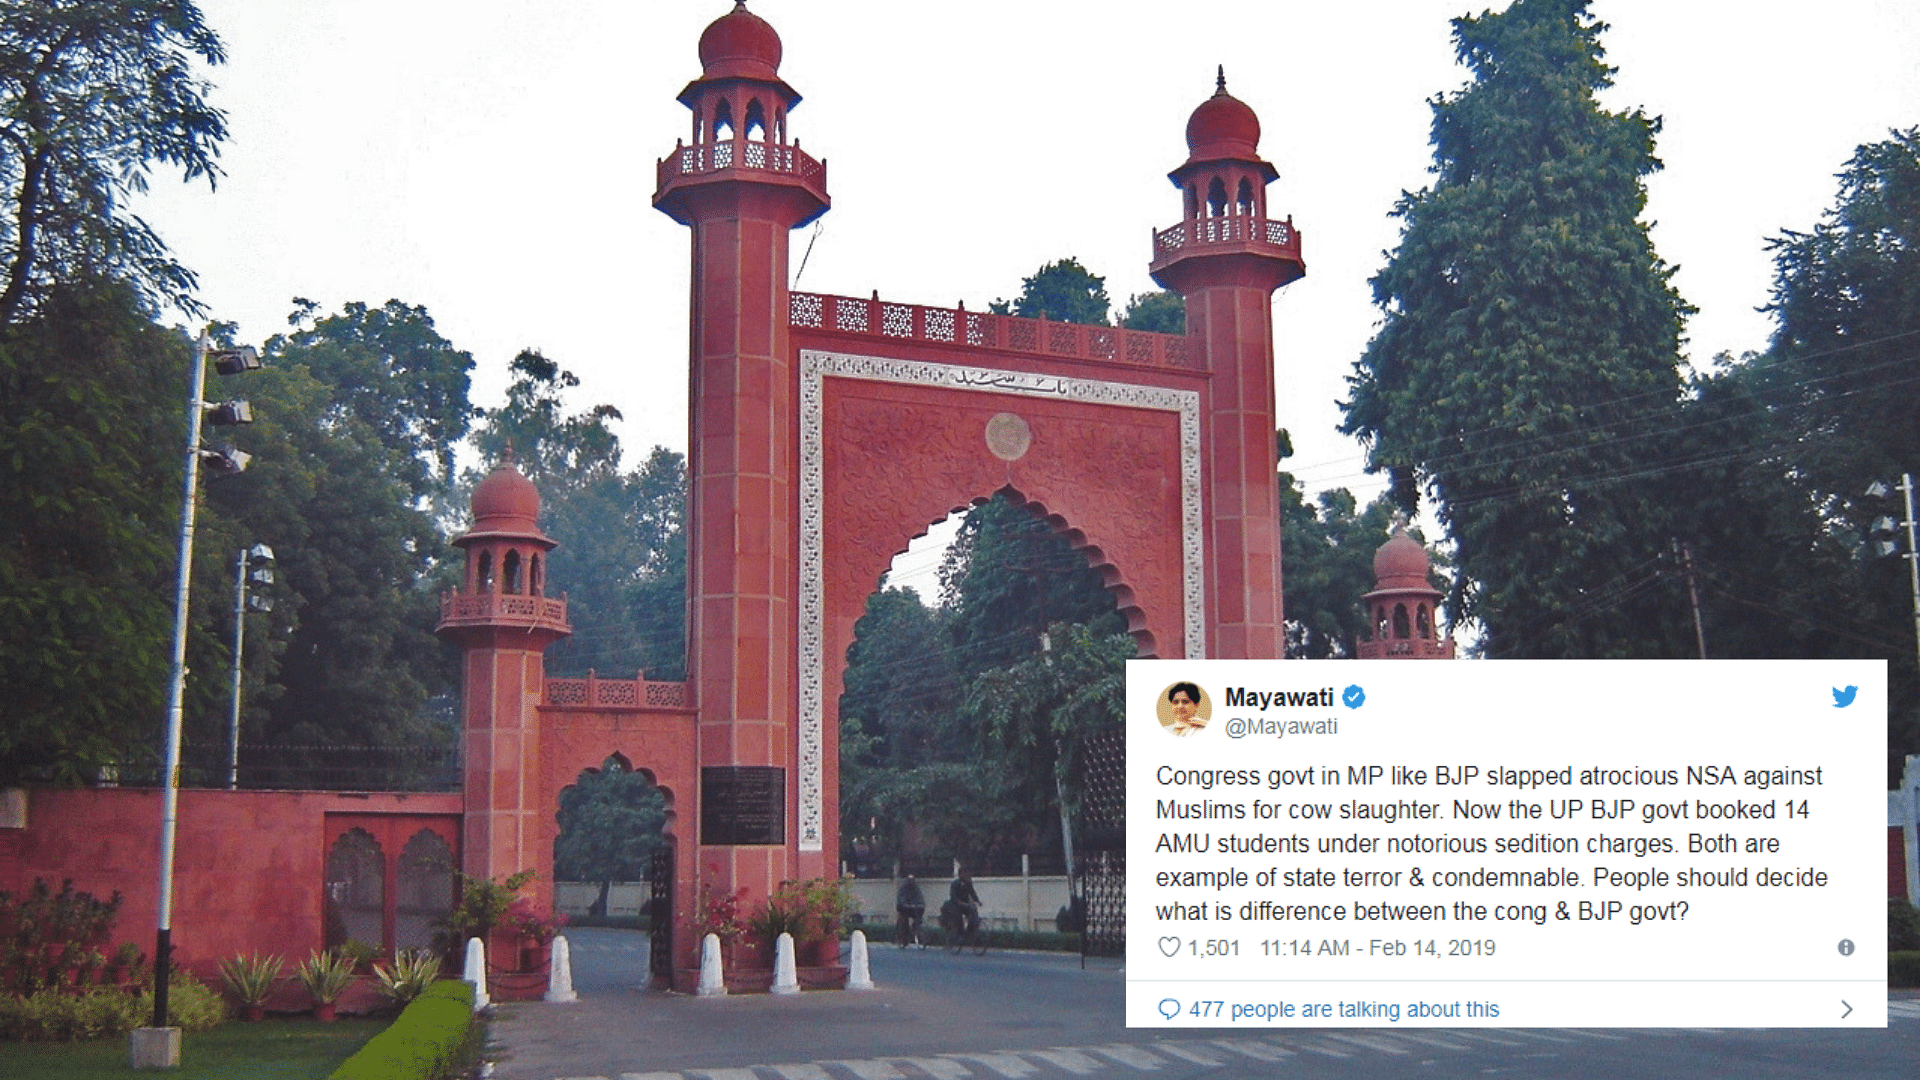 Twitter has erupted in anger over the sedition charges slapped on the 14 students of AMU.